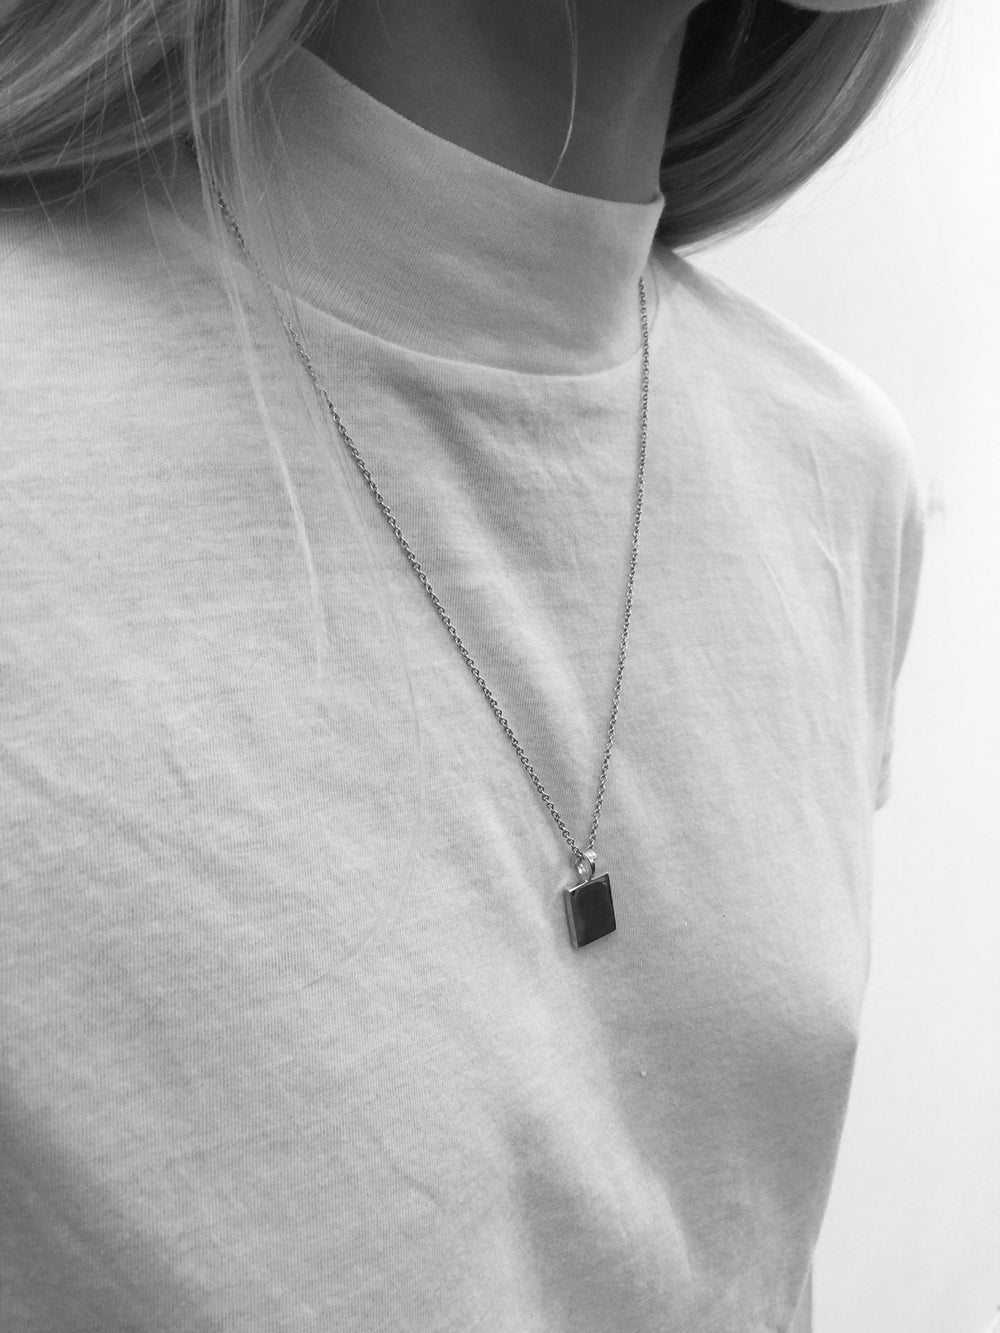 ID Tag Necklace | Silver